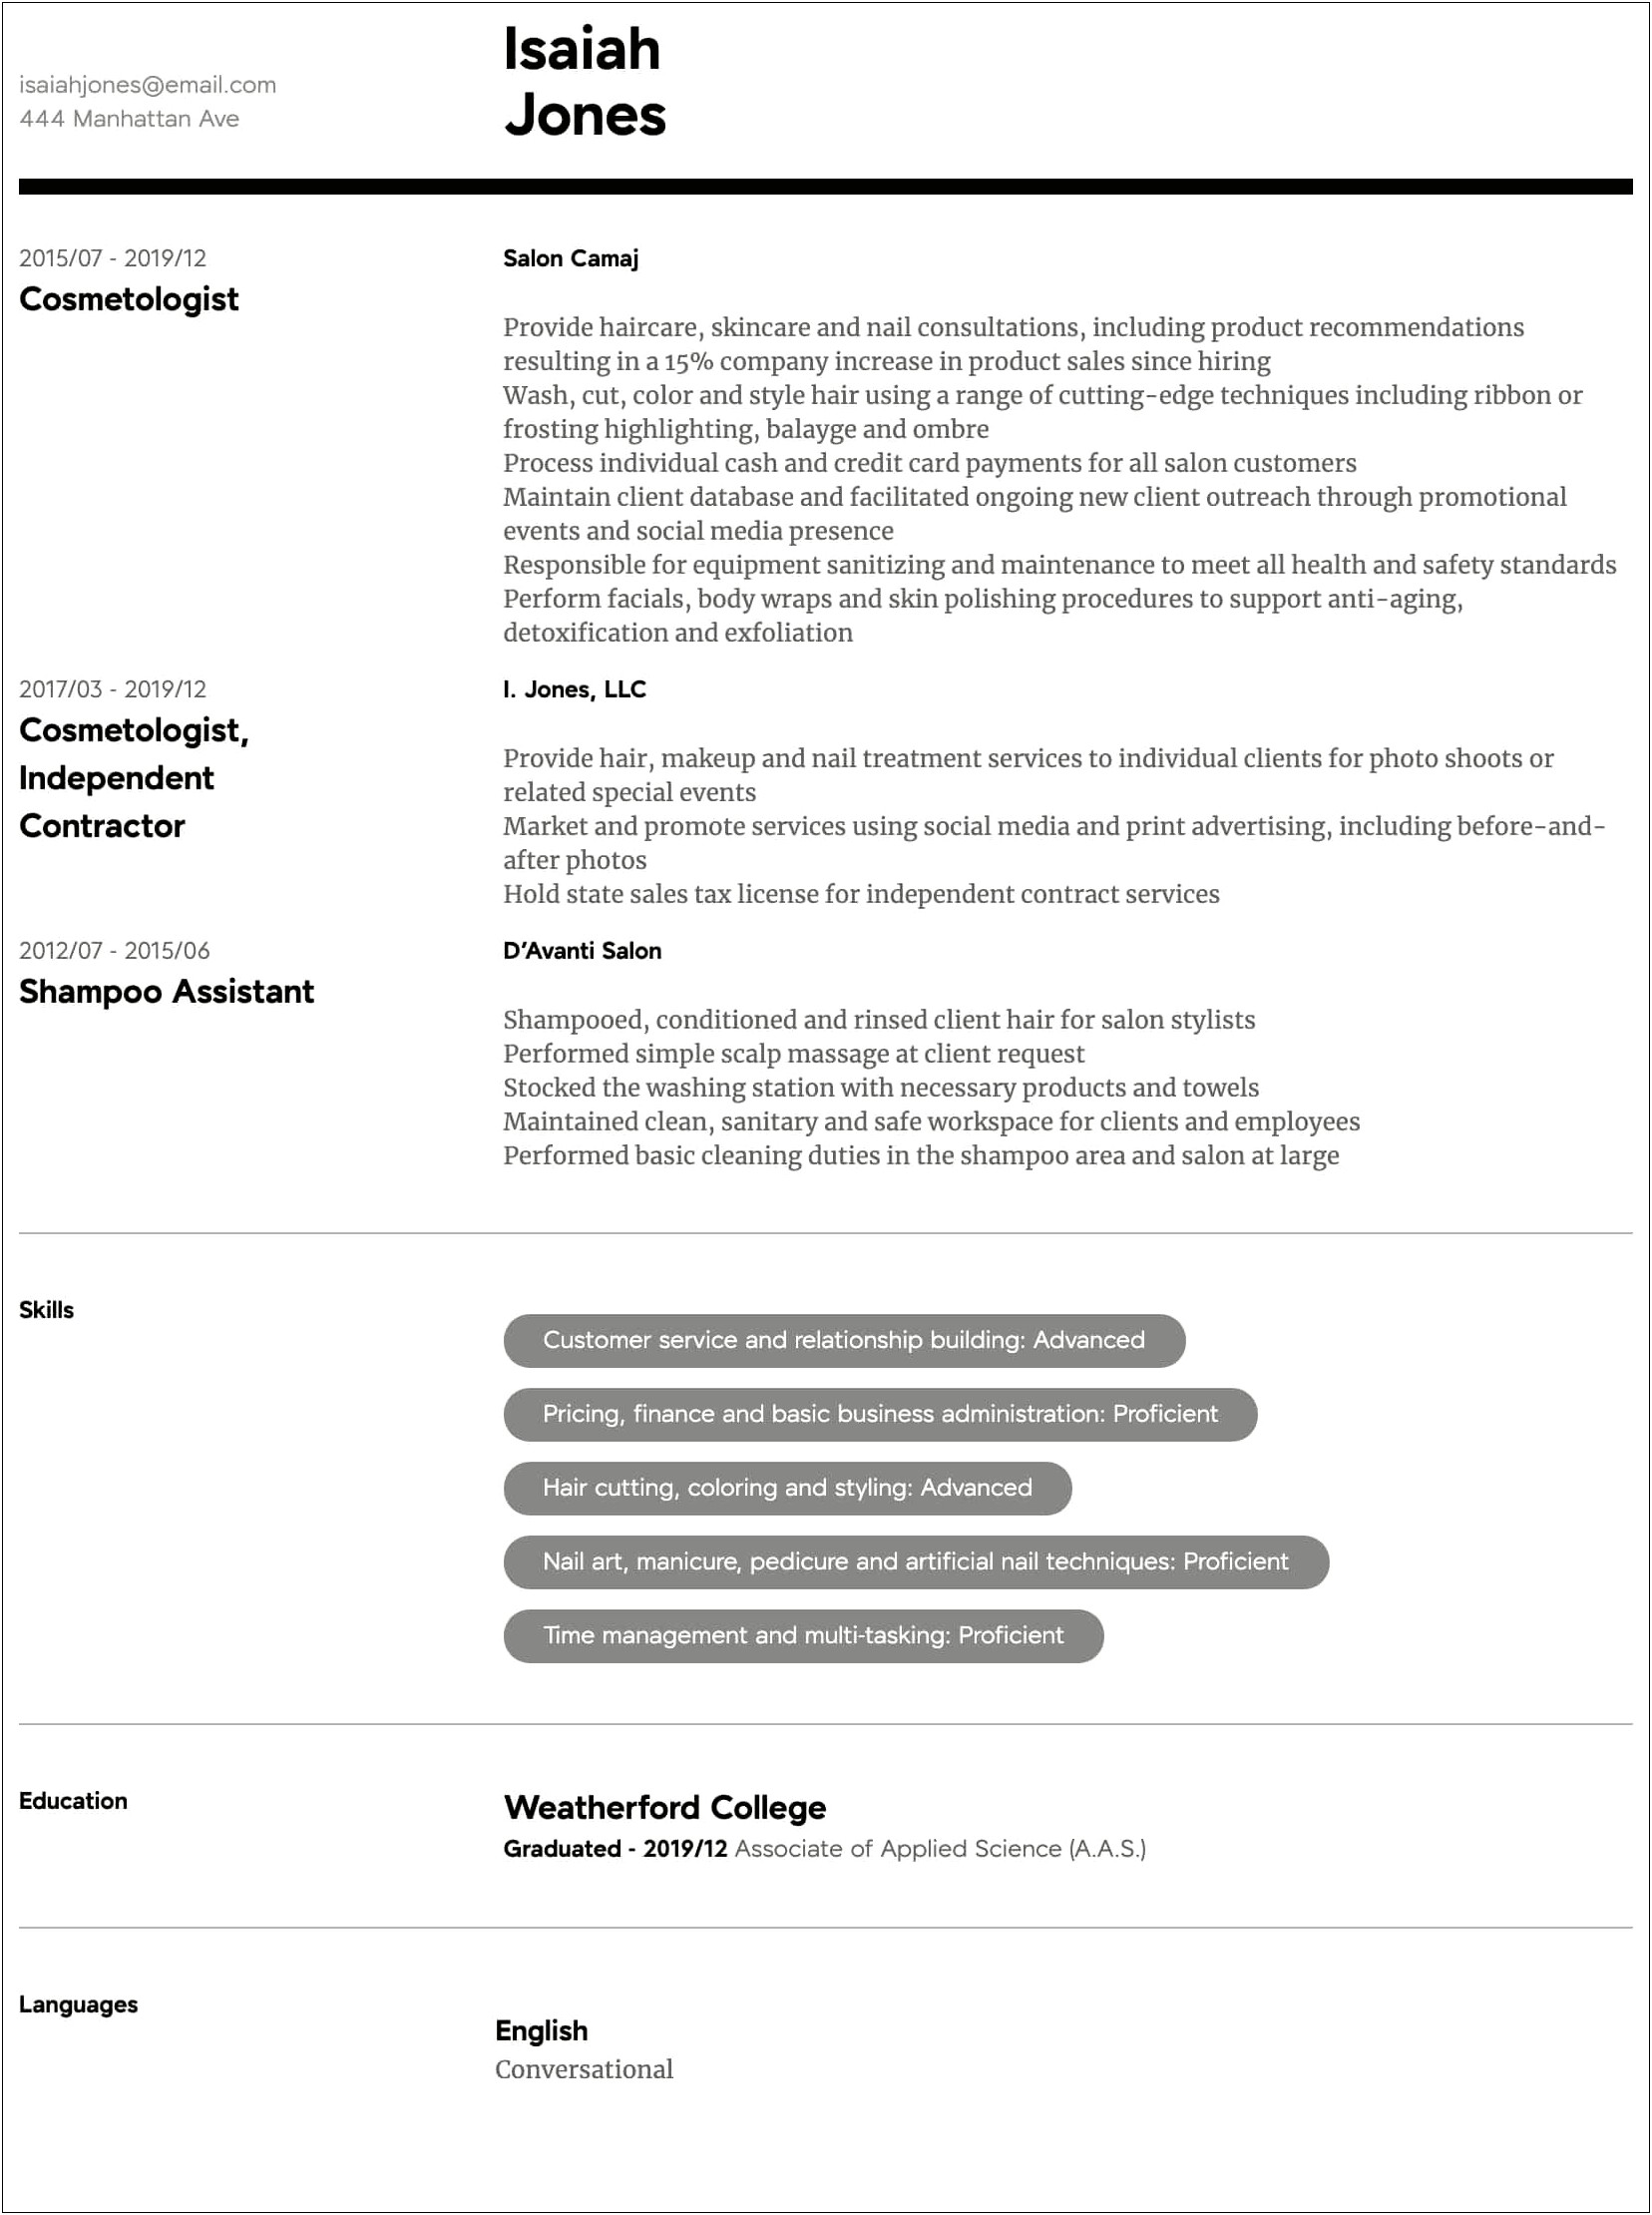 Skills And Abilities On A Resume For Cosmetologist